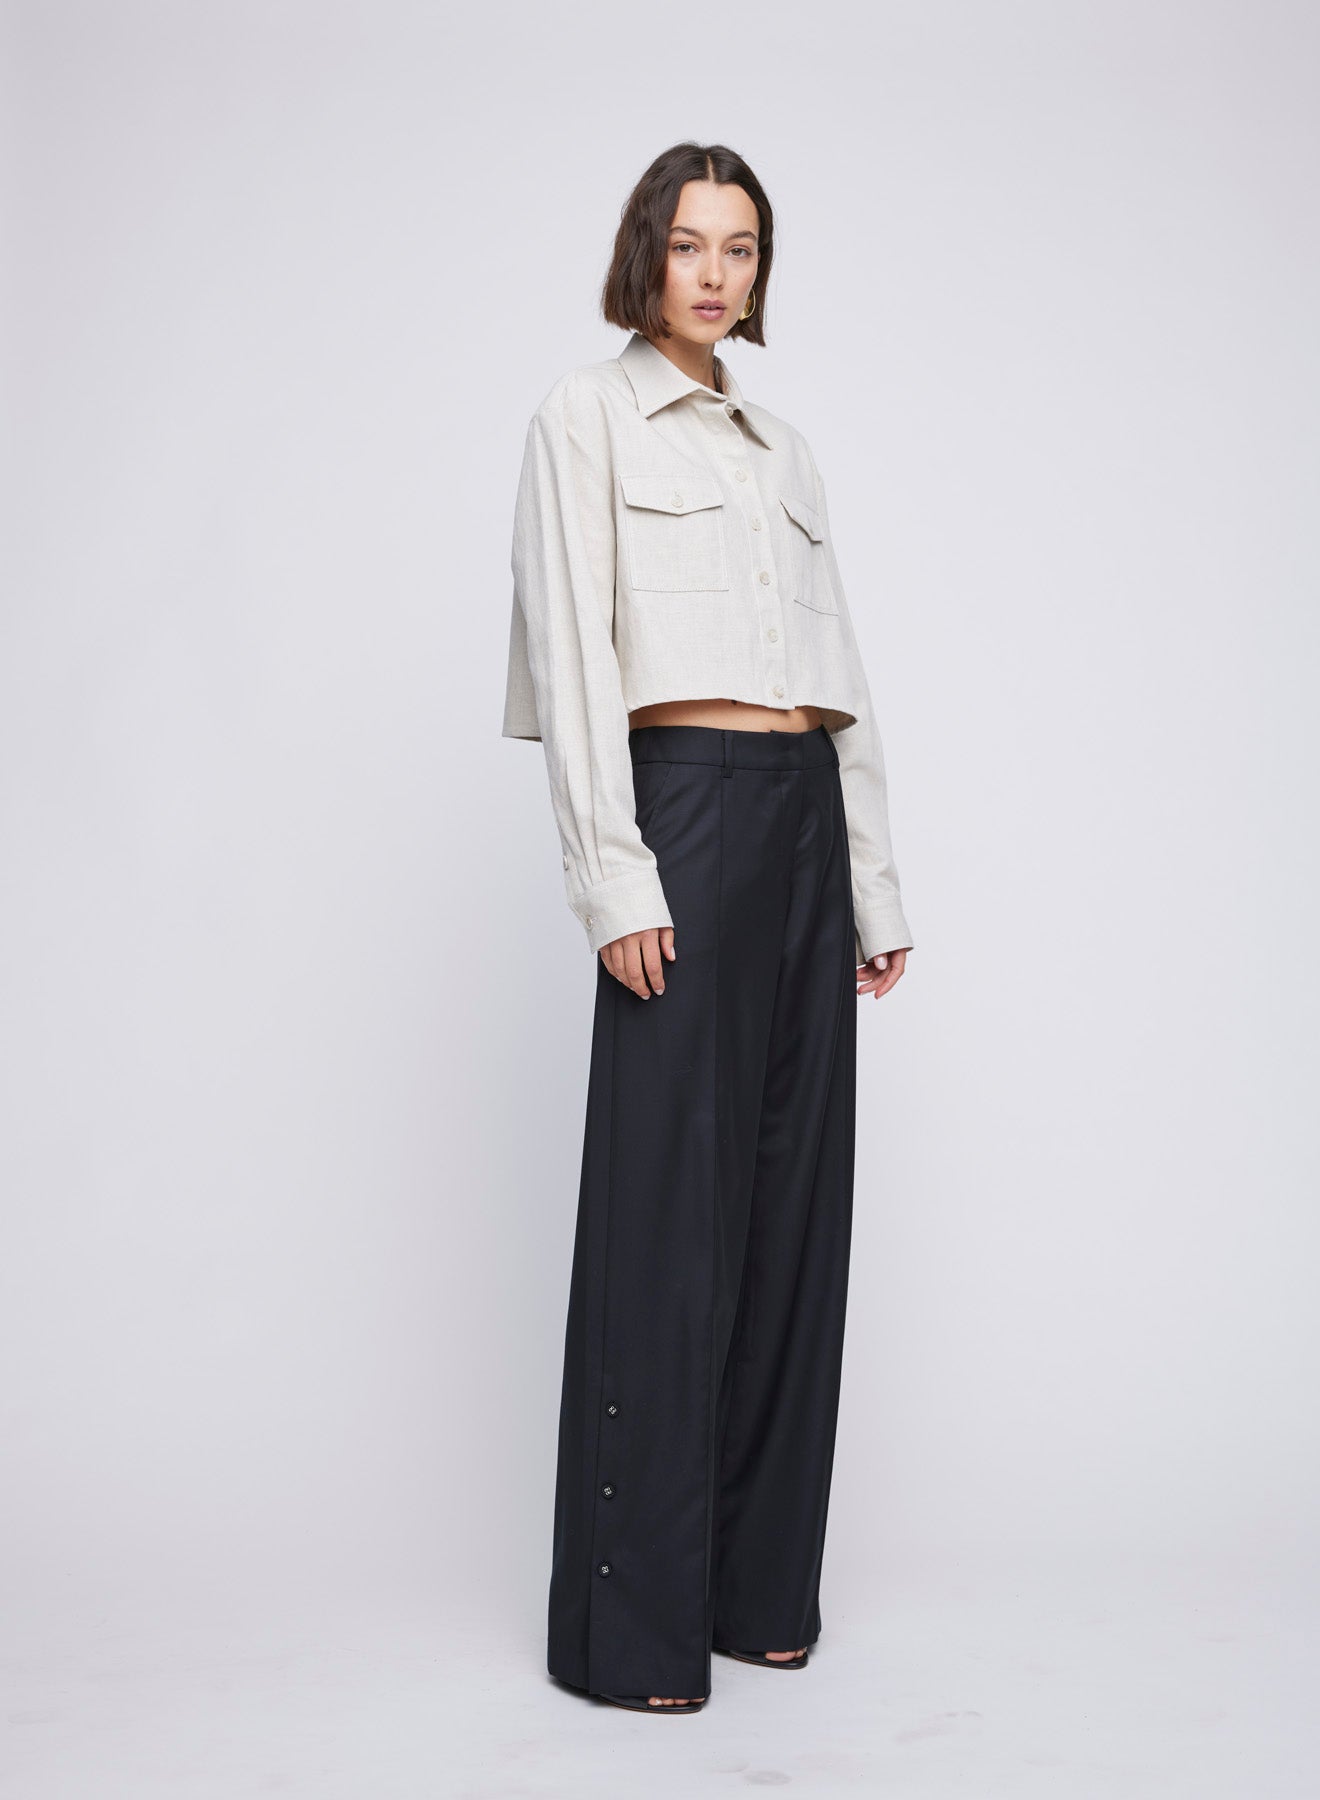 ANNA QUAN Ryan Shirt in cloud linen. Relaxed fit, cropped length, two patch pockets, and functional buttons. Ideal for a stylish spring day look. Linen shirts, everyday linen shirts, oversized shirt. 